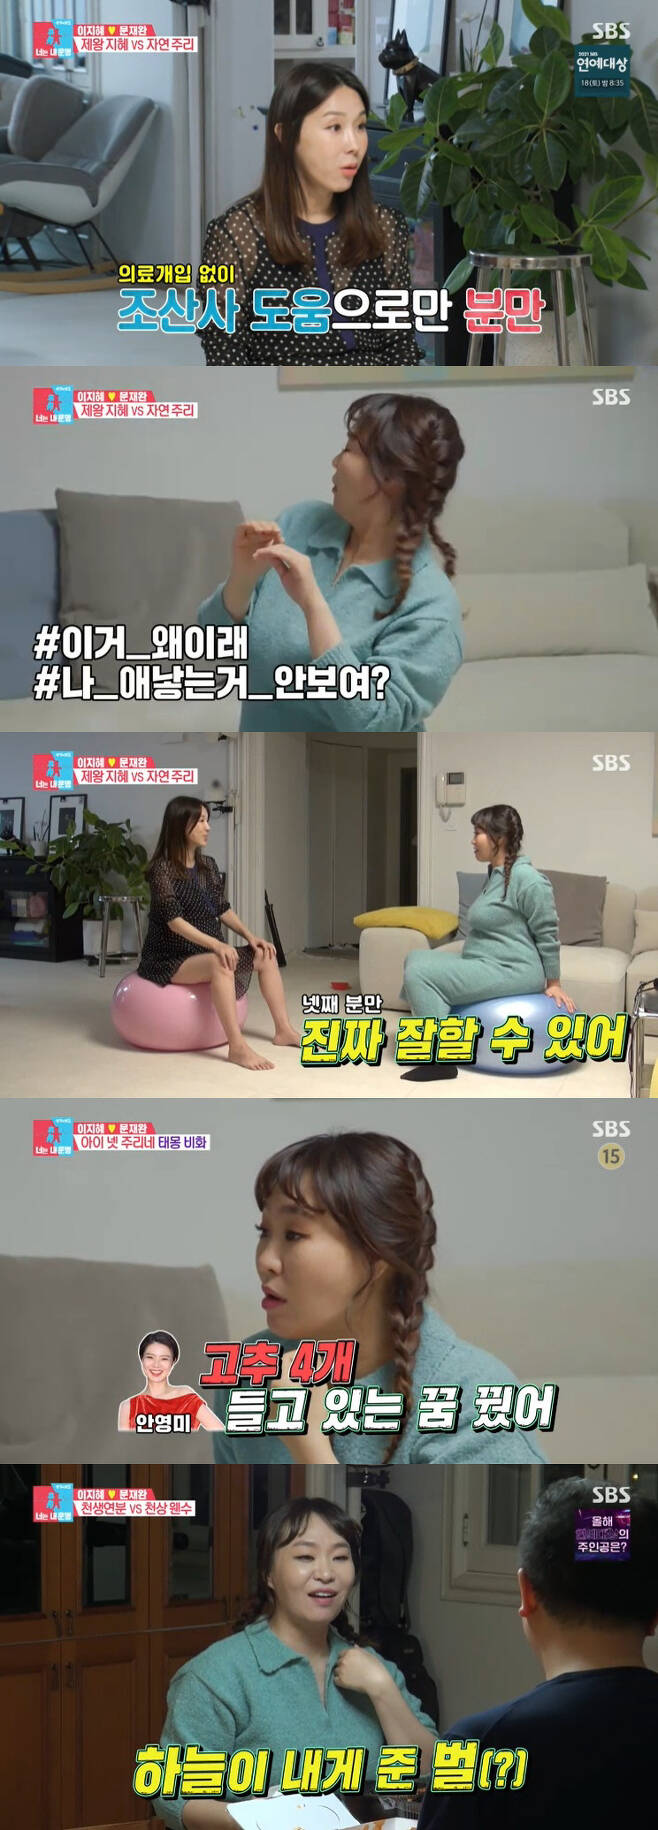 Same Bed, Different Dreams 2: You Are My Dest Jung Ju-Ri reveals the reality of a multi-mother.On the 13th, SBS entertainment program Same Bed, Different Dreams 2: You Are My Dest - You Are My Dest featured Lee Ji-hye, who met Jung Ju-Ri, a multi-mother, ahead of her second birth.Lee Ji-hye Moon Jea-wan took a self-fulfilled photo before meeting the second mini, and daughter Tari was also impressed by her father and mother.Lee Ji-hye also wore a colorful mini dress following Cropty, which gave off a fatal pose, saying: I wanted to shoot differently from others.The guest who came to Lee Ji-hyes house, who was shooting a full-length picture, was Divine Mom Jung Ju-Ri.Jung Ju-Ri, who has three sons, has recently become a hot topic for the fourth pregnancy news.Lee Ji-hye asked Jung Ju-Ri how he took the full-length picture; Jung Ju-Ri said: At first I tried to have fun with Husband.In the second time, I was so busy taking the first one that I left a record. I could not take the third time. I got a stomach from the moment of the test, said Jung Ju-Ri, who was five months pregnant at the time of the recording. I was lucky to be the youngest in the coronation.I didnt try, he said, and was surprised.Jung Ju-Ri joked that we are less like we loved when asked by Lee Ji-hye, Do you want to give birth as you get born?Jung Ju-Ri, who wanted her daughter from the first time, said, I wanted to be the second, but I gave up at the third time. It was just funny. The third mother feels like a birth.Life is fun, he said, leaving a meaningful statement.The menu prepared by Moon Jea-wan for the two pre-mams is abalone seaweed soup.Lee Ji-hye and Jung Ju-Ri worked out and talked about giving birth while Moon Jea-wan cooked.Jung Ju-Ri said all three children had naturalistic births, saying, I received only the help of the midwife without medical intervention. All three were underwater. I was pregnant.I went to the hospital in secret, not to mention it. But thats the naturalistic birth hospital.Husband was surprised and covered his eyes. But Jung Ju-Ri suffered 30 hours of labor in his first child.Jung Ju-Ri said: I thought I was really dying and I even prepared for a break-up with Husband, the labor was so hard.Nevertheless, the reason for the underwater delivery was I thought I could do well, but I came up with labor.I think I can do better in the fourth time, he said.The first, followed by the fourth Taemong, Ahn Young Mi.Jung Ju-Ri said, Ahn Young Mi said that I could not do it because I had my taemon, but I knew I was pregnant a week later.Im coming out tomorrow. I heard four chili peppers in my dream. Third and fourth. I know its a secret, but you know its happening anyway.I was surprised to hear that I was pregnant and contacted. Jung Ju-Ri, who had been together for 15 years until his love life, said, I have been together for 15 years, but I do not know about him.I hid my nature for 15 years. Jung Ju-Ri said, Im angry because Husband didnt wash so much, and when I saw the e-mail I sent to Husband in the kitchen, he said, It was delicious shrimp with my fingernails.It was so good in the past, but now it is stored on my cell phone as Chunbeol. Before that, it was the source of the disease and U.Kim Yoon-ji Choi Woo-sung and his wife met Kim Moo Yeol Young-ah in Yangyang.Kim Yoon-ji and Yoon Seung-ah were linked with trainee motives. The Souls asked the couple, who were in their seventh year, about their marriage life.We are so different, said Yoon Seung-ah and Kim Moo Yeol, who unexpectedly replied: There are so many others.Everything is different except for human beings, Yoon Seung-ah said, Does not our socks also ground? Its better to get it quickly if its not real, said Yoon Seung-ah.Yoon Seung-ah said: I fought three years with my brother and the Robots cleaner, I was careful that the cleaner was at home, so I didnt need it, but my brother said I needed it.I feel like Im cleaning together, Kim Moo Yeol said, I also have a mop robot.Yoon Seung-ah and Kim Moo Yeol released the marriage story for the first time.Yoon Seung-ah said that he learned Kim Moo Yeol through his first musical in his life. When I was a solo, my brother suddenly came to mind.My friend, Bada Hae, knew my brother. So I asked him to introduce me if he was single. Kim Moo Yeol, who searched for Yoon Seung-ah, said he wanted to meet in two days against Yoon Seung-ah.Two people who met briefly at dawn for Yoon Seung-ah, who had an overseas schedule. They felt good about each other as soon as they met.I made the confession, but the atmosphere was made by Yoon Seung-ah, Kim Moo Yeol said.They also mentioned the so-called variable SNS where secret love was revealed. It was just a while ago.I was filming then, but there were hundreds of calls in absenteeism, Yoon Seung-ah recalled, because it was a time when public devotion was cautious.Kim Moo Yeol thanked Yoon Seung-ah for I was worried about my mistake and fortunately I was cool.As for Proposal, I first consulted to marriage; I did not do formal proposal and went to Miri for my honeymoon because of the schedule before the marriage ceremony.I bought a Miri ring in Korea and went to hide it. I wanted to try it at the Eiffel Tower while I was in Paris. Kim Moo Yeol said, I asked him to go with me when the lights were on at night, but he was tired.I just grabbed him and I did it at the time of the light, he said.Kim Moo Yeol scored a low 50 for his proposal, but Yoon Seung-ah said, But the effort is hypothetical.98 points, he said, expressing satisfaction.